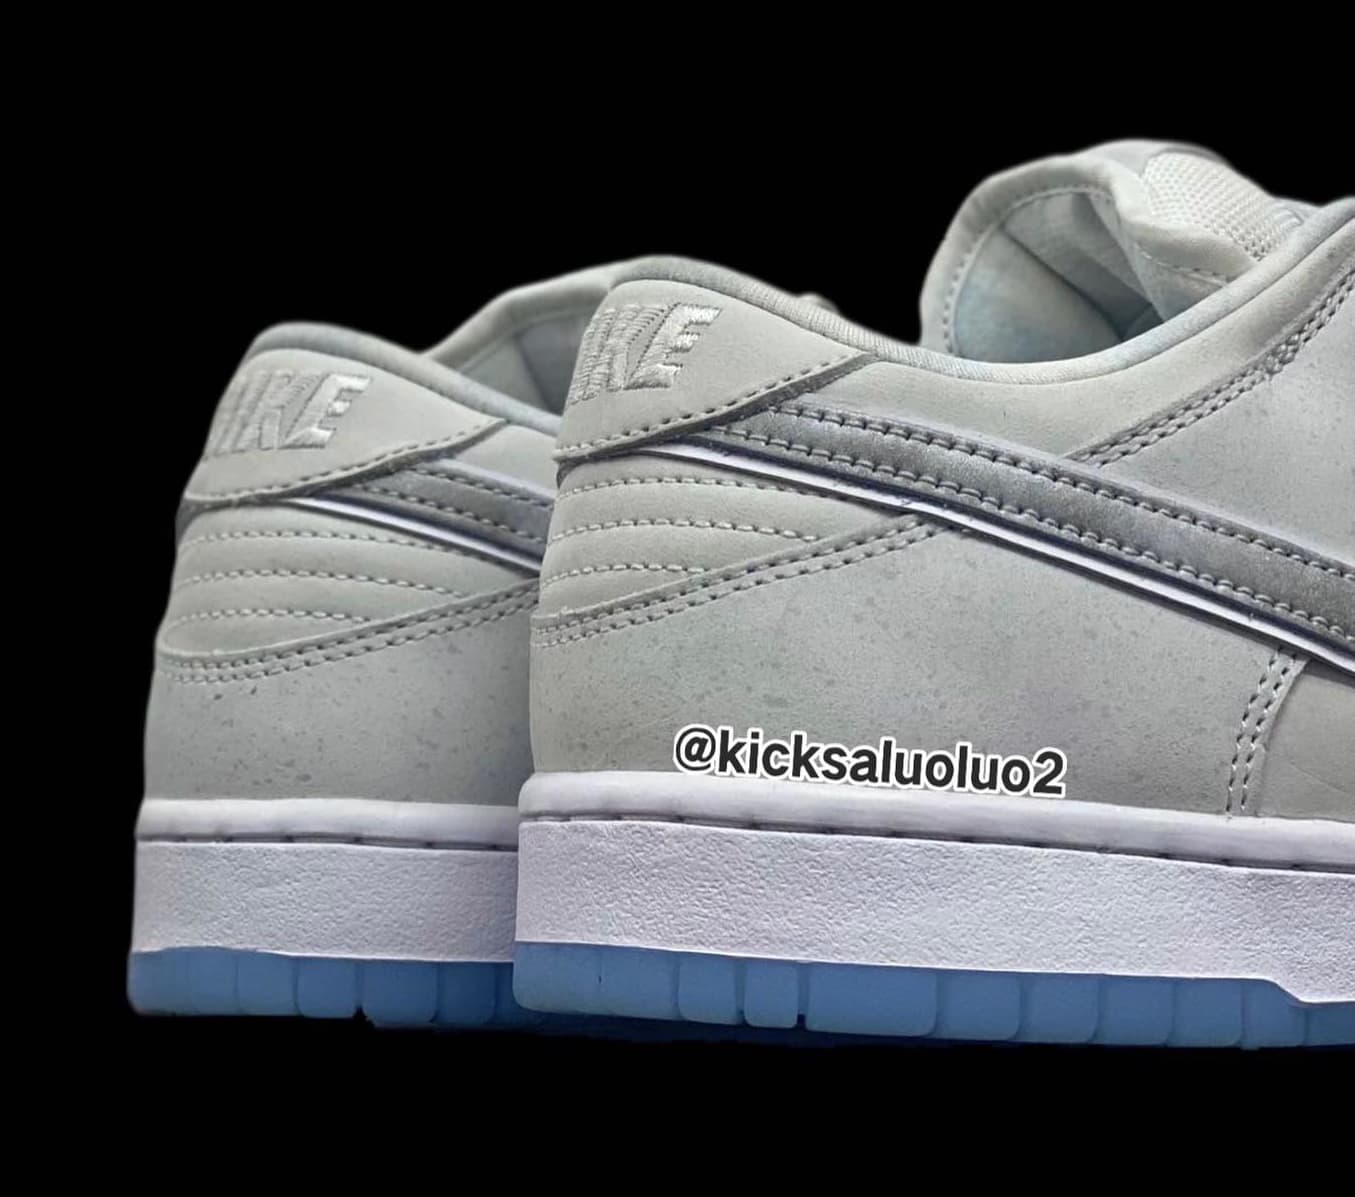 Concepts x Nike SB Dunk Low 'White Lobster' Heel